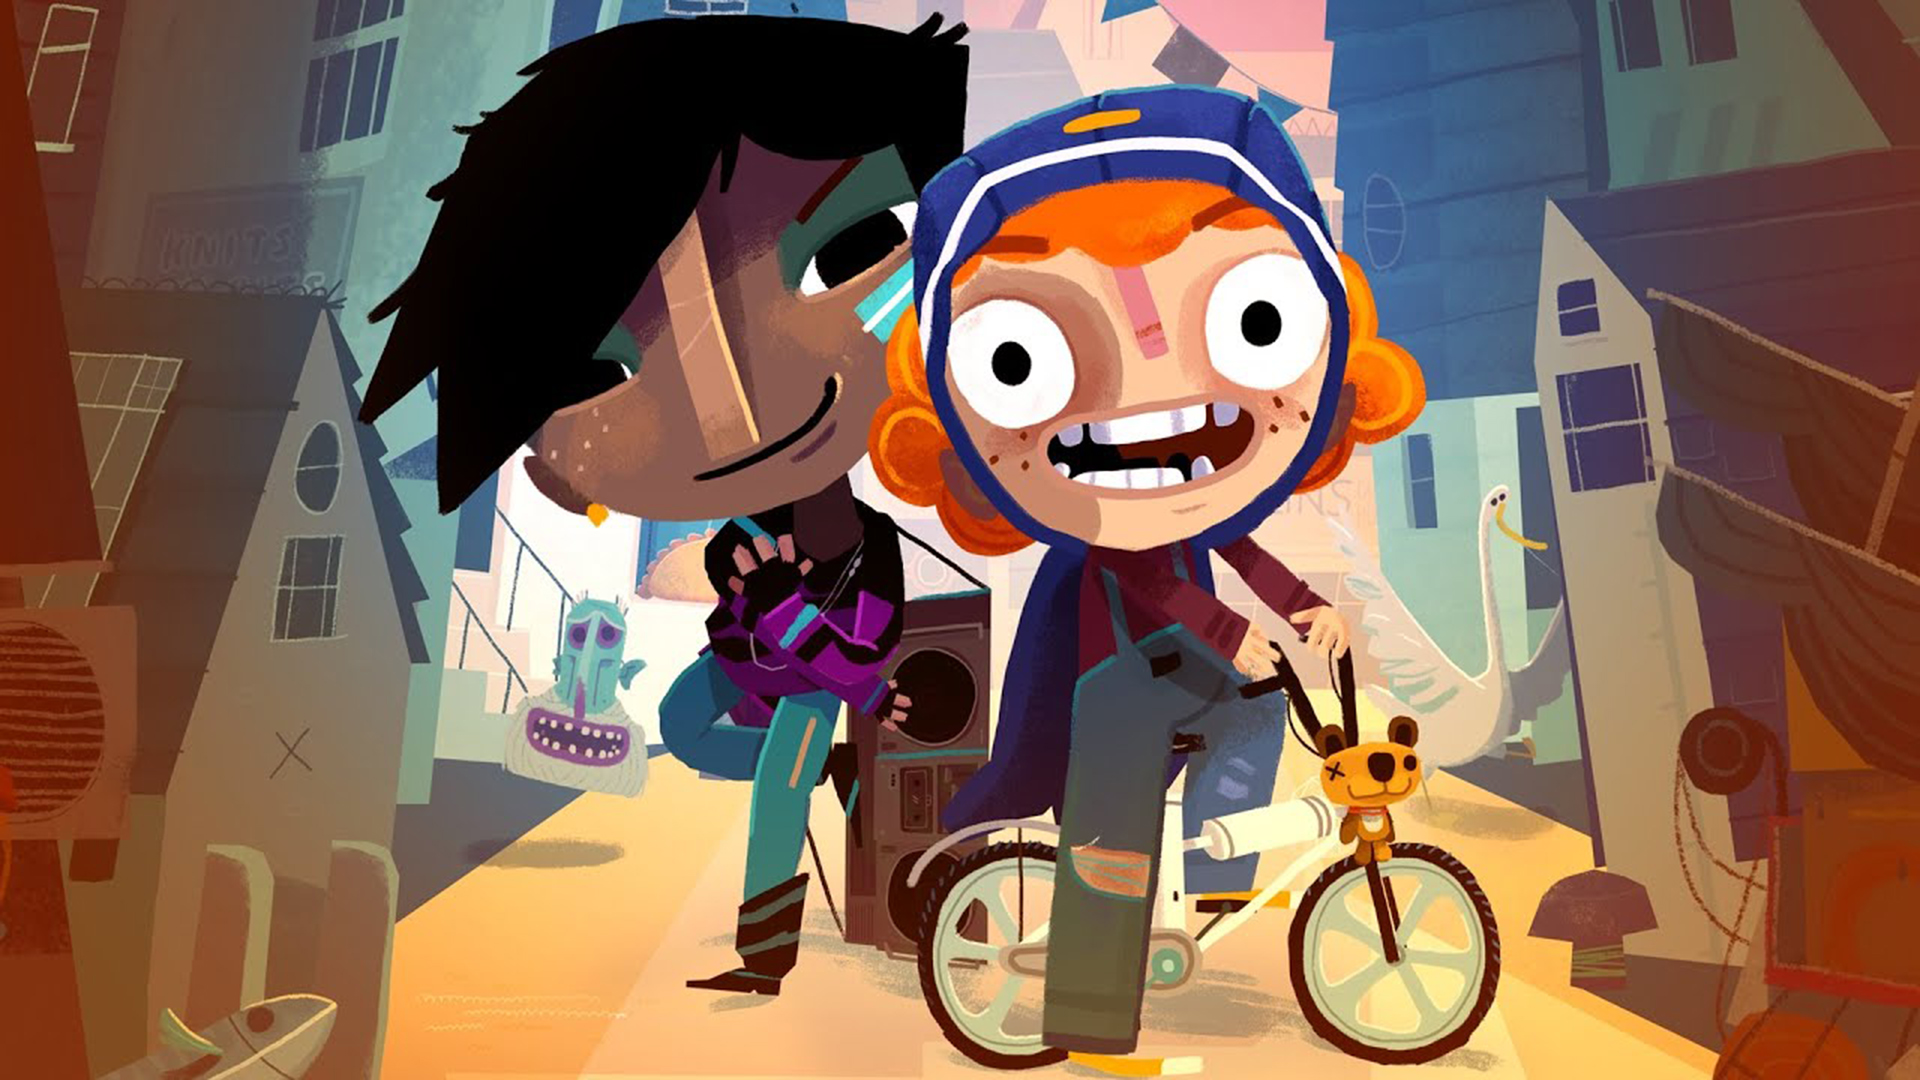 Two young girls riding bikes stare down the camera in Knights and Bikes